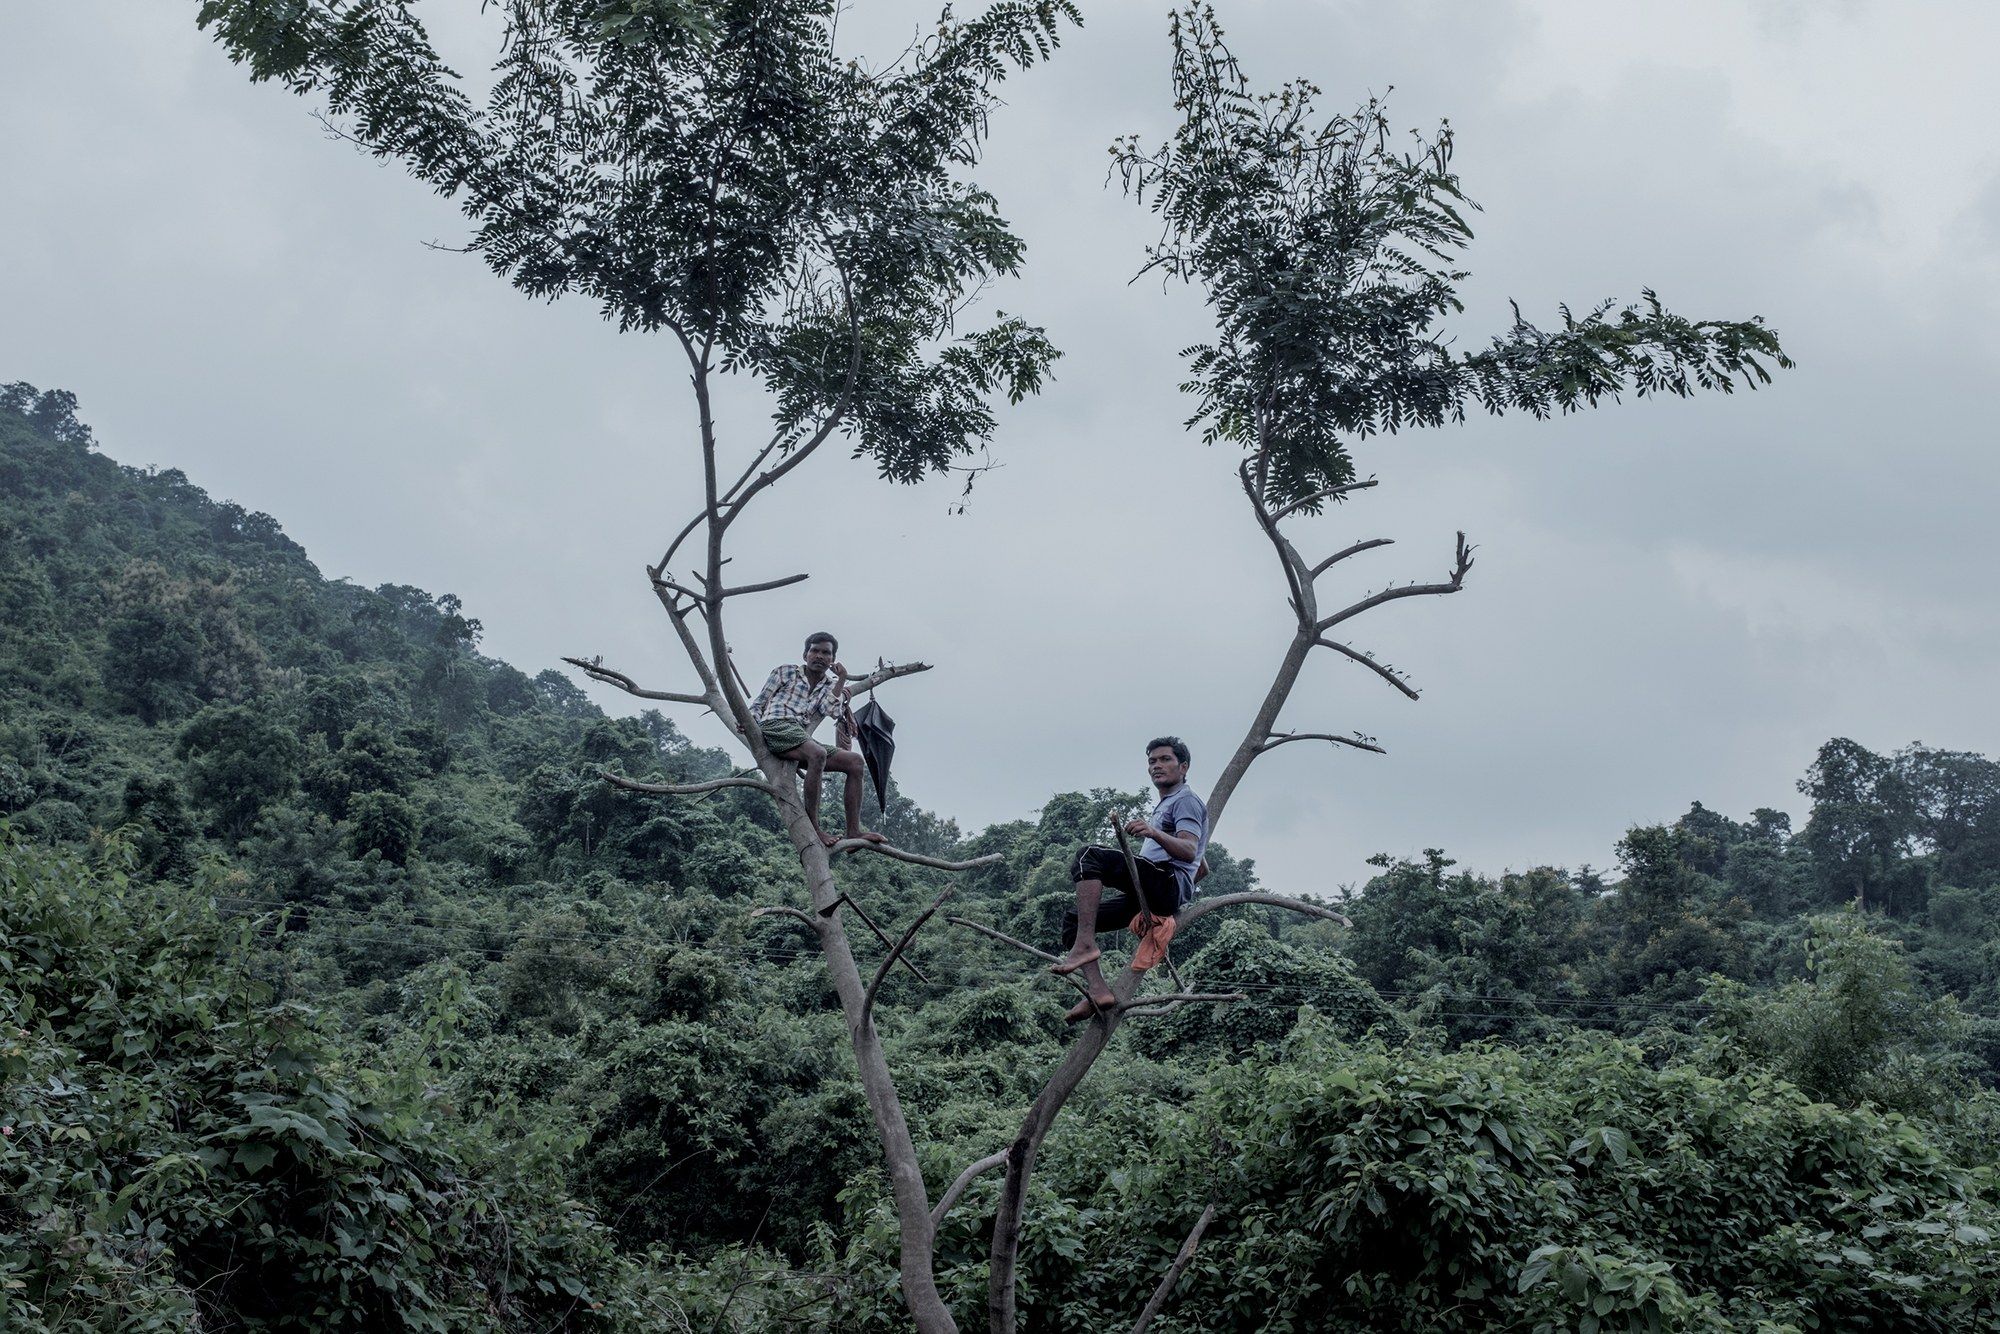 Cowherds wait atop trees along a road between villages. Image by Arko Datto. India, 2018.